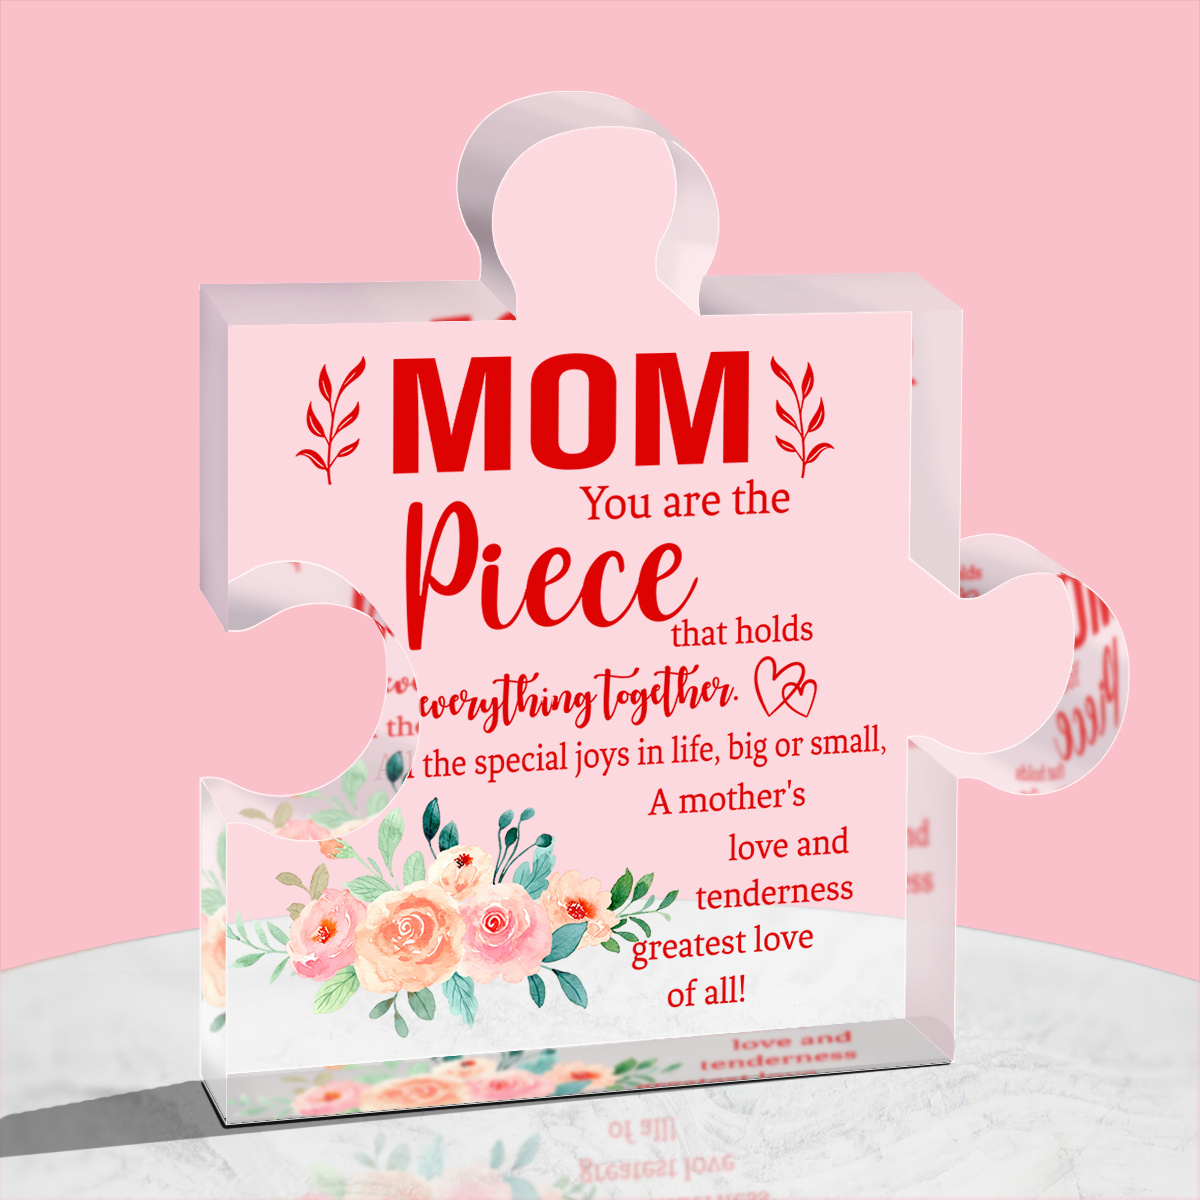 Gifts for Mom from Daughter, Son - Christmas Gifts for Mom, Mom Christmas  Gifts, Birthday Gifts for Mom, Mom Birthday Gifts - Mom Gifts, Mother  Gifts